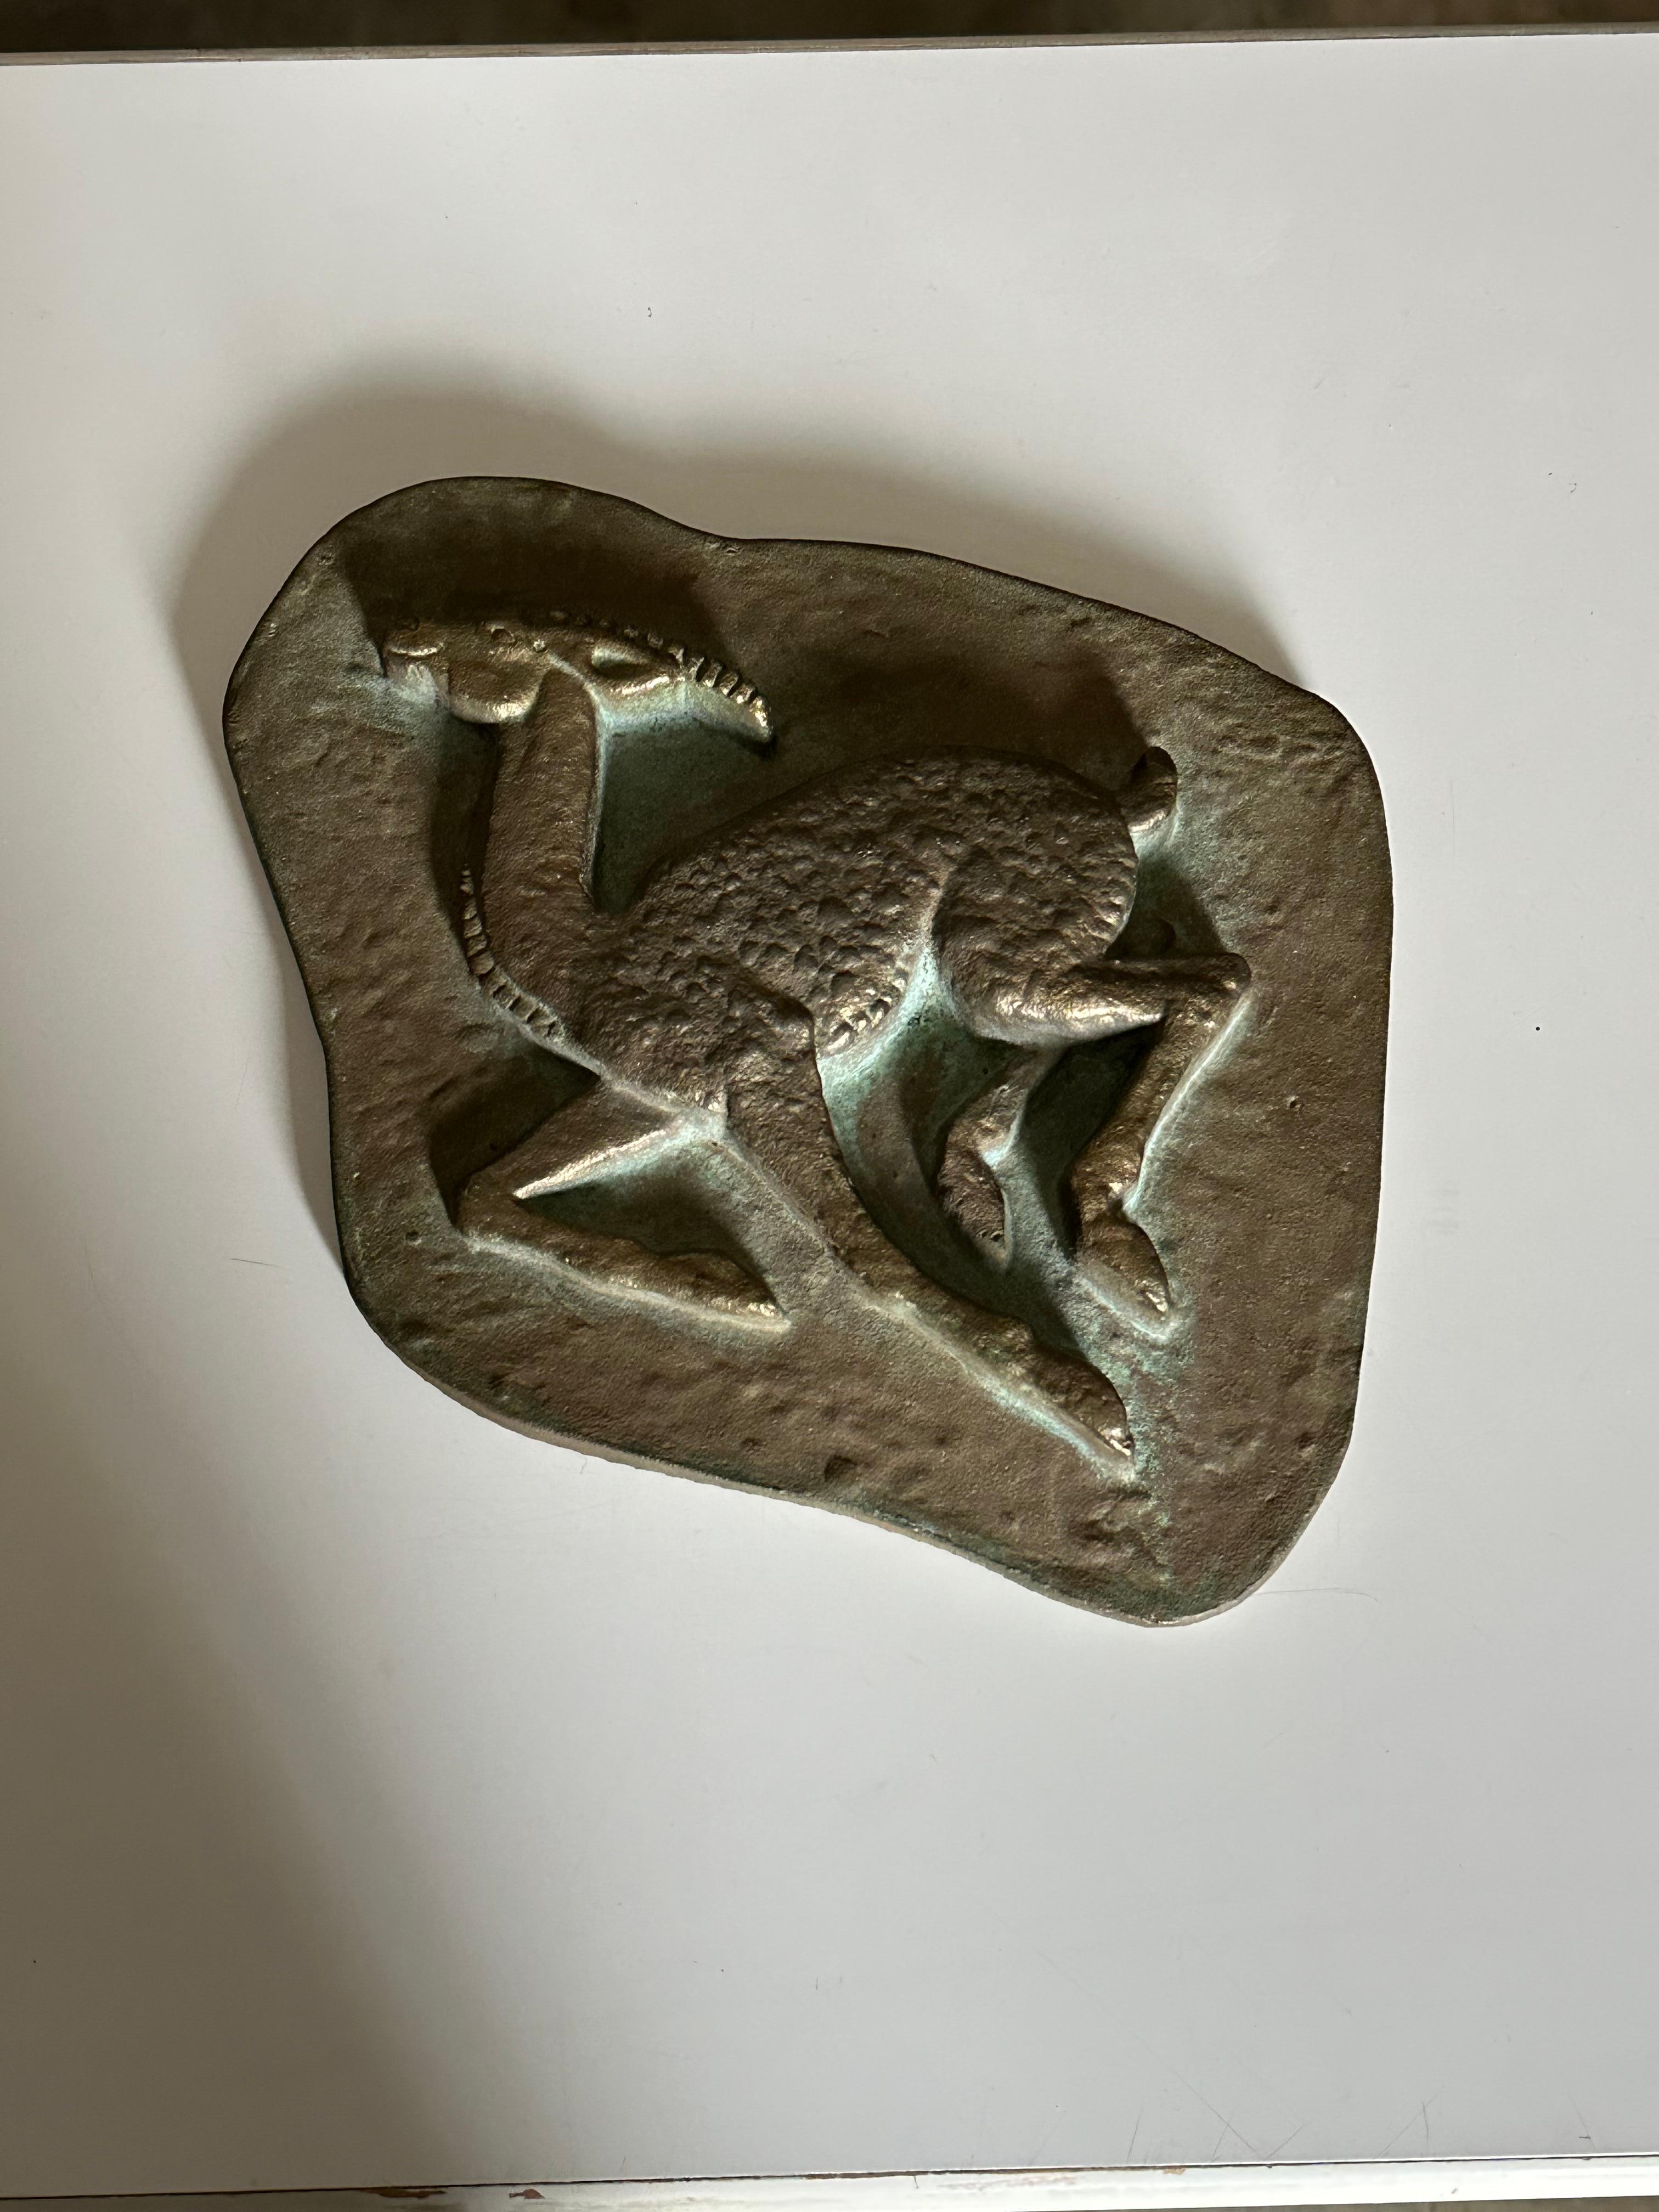 A well proportioned sculptural wall relief from Sweden in solid bronze, circa 1950s. Piece depicts an antelope with has a gorgeous green patina forming around the animal. Item weighs probably 5-6lbs and the main surface is also solid. there is a